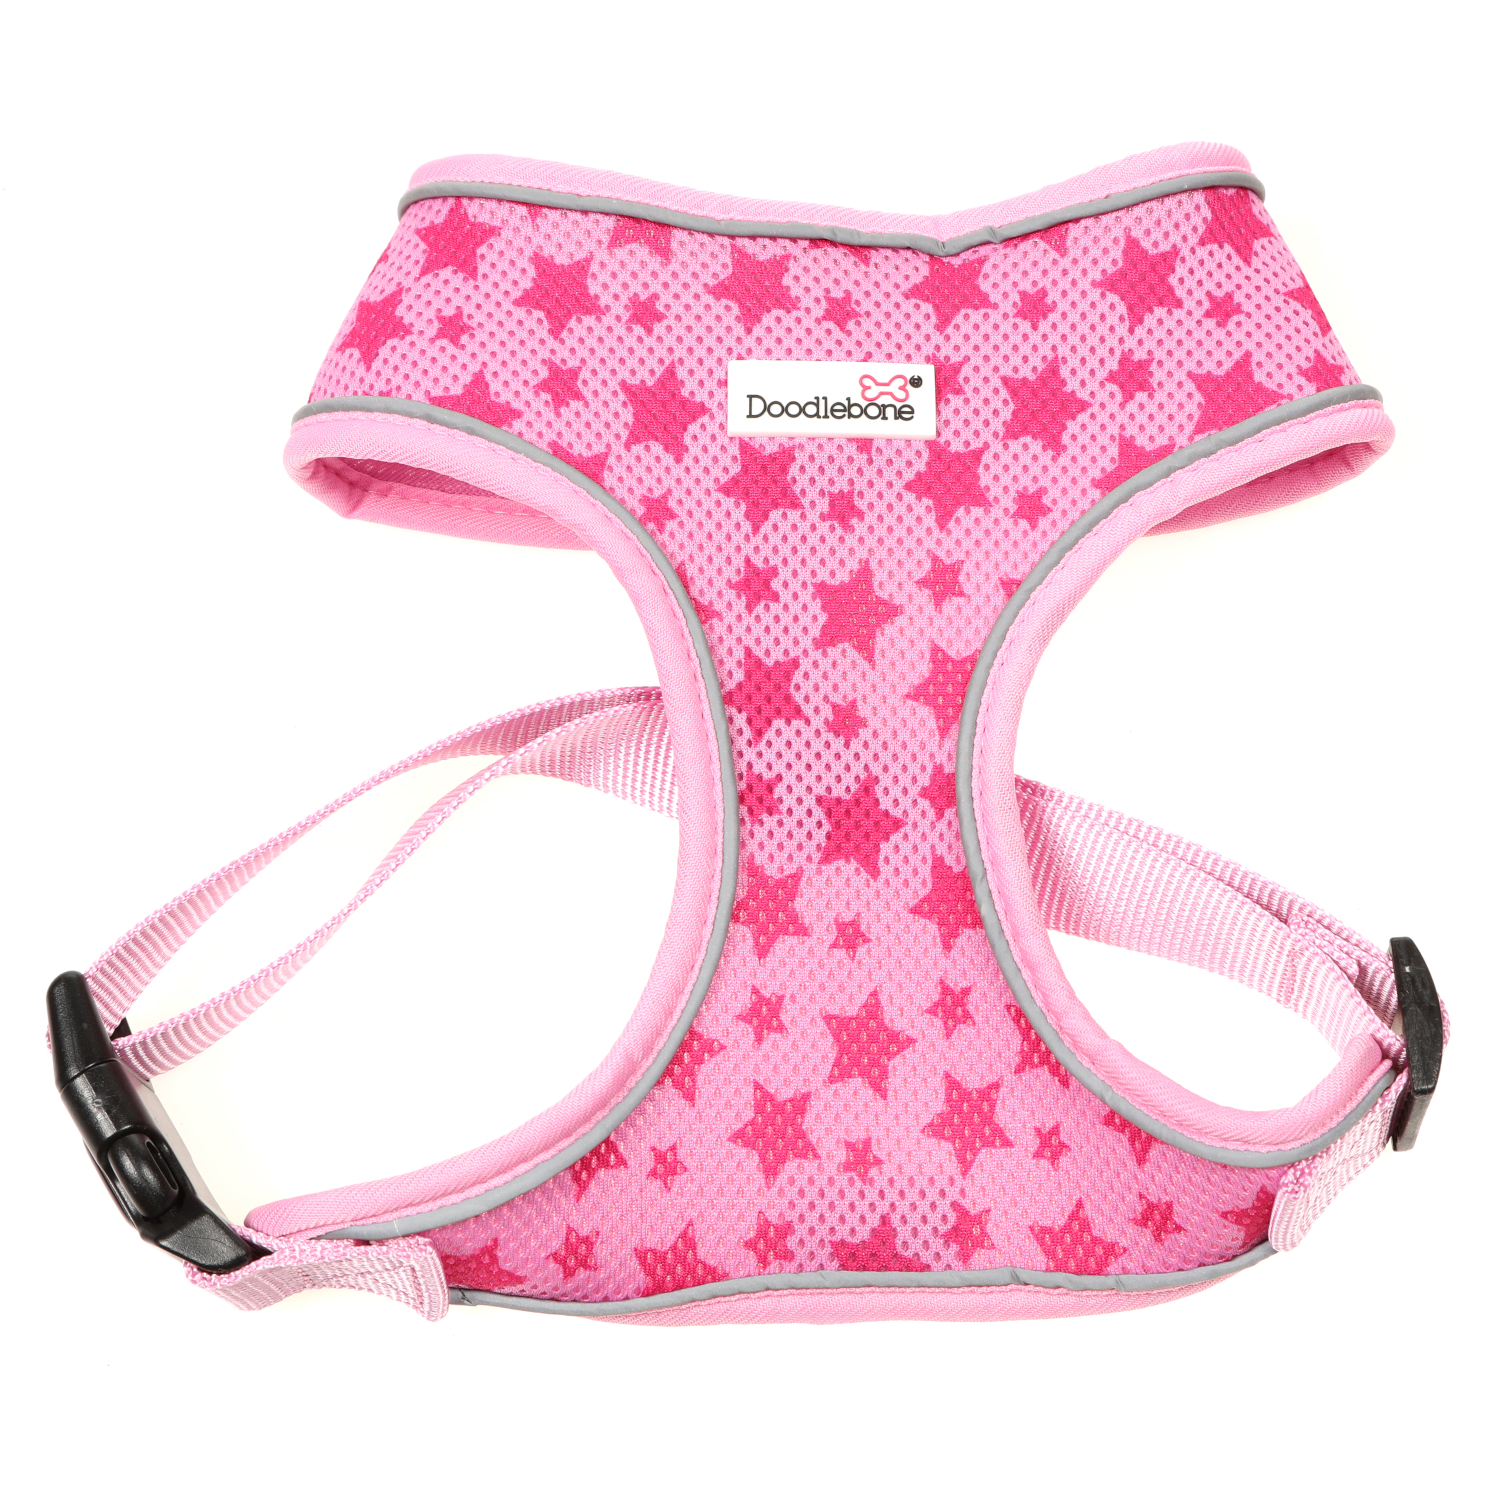 Doodlebone soft Padded Dog Puppy Air mesh harness choice of colours and sizes 